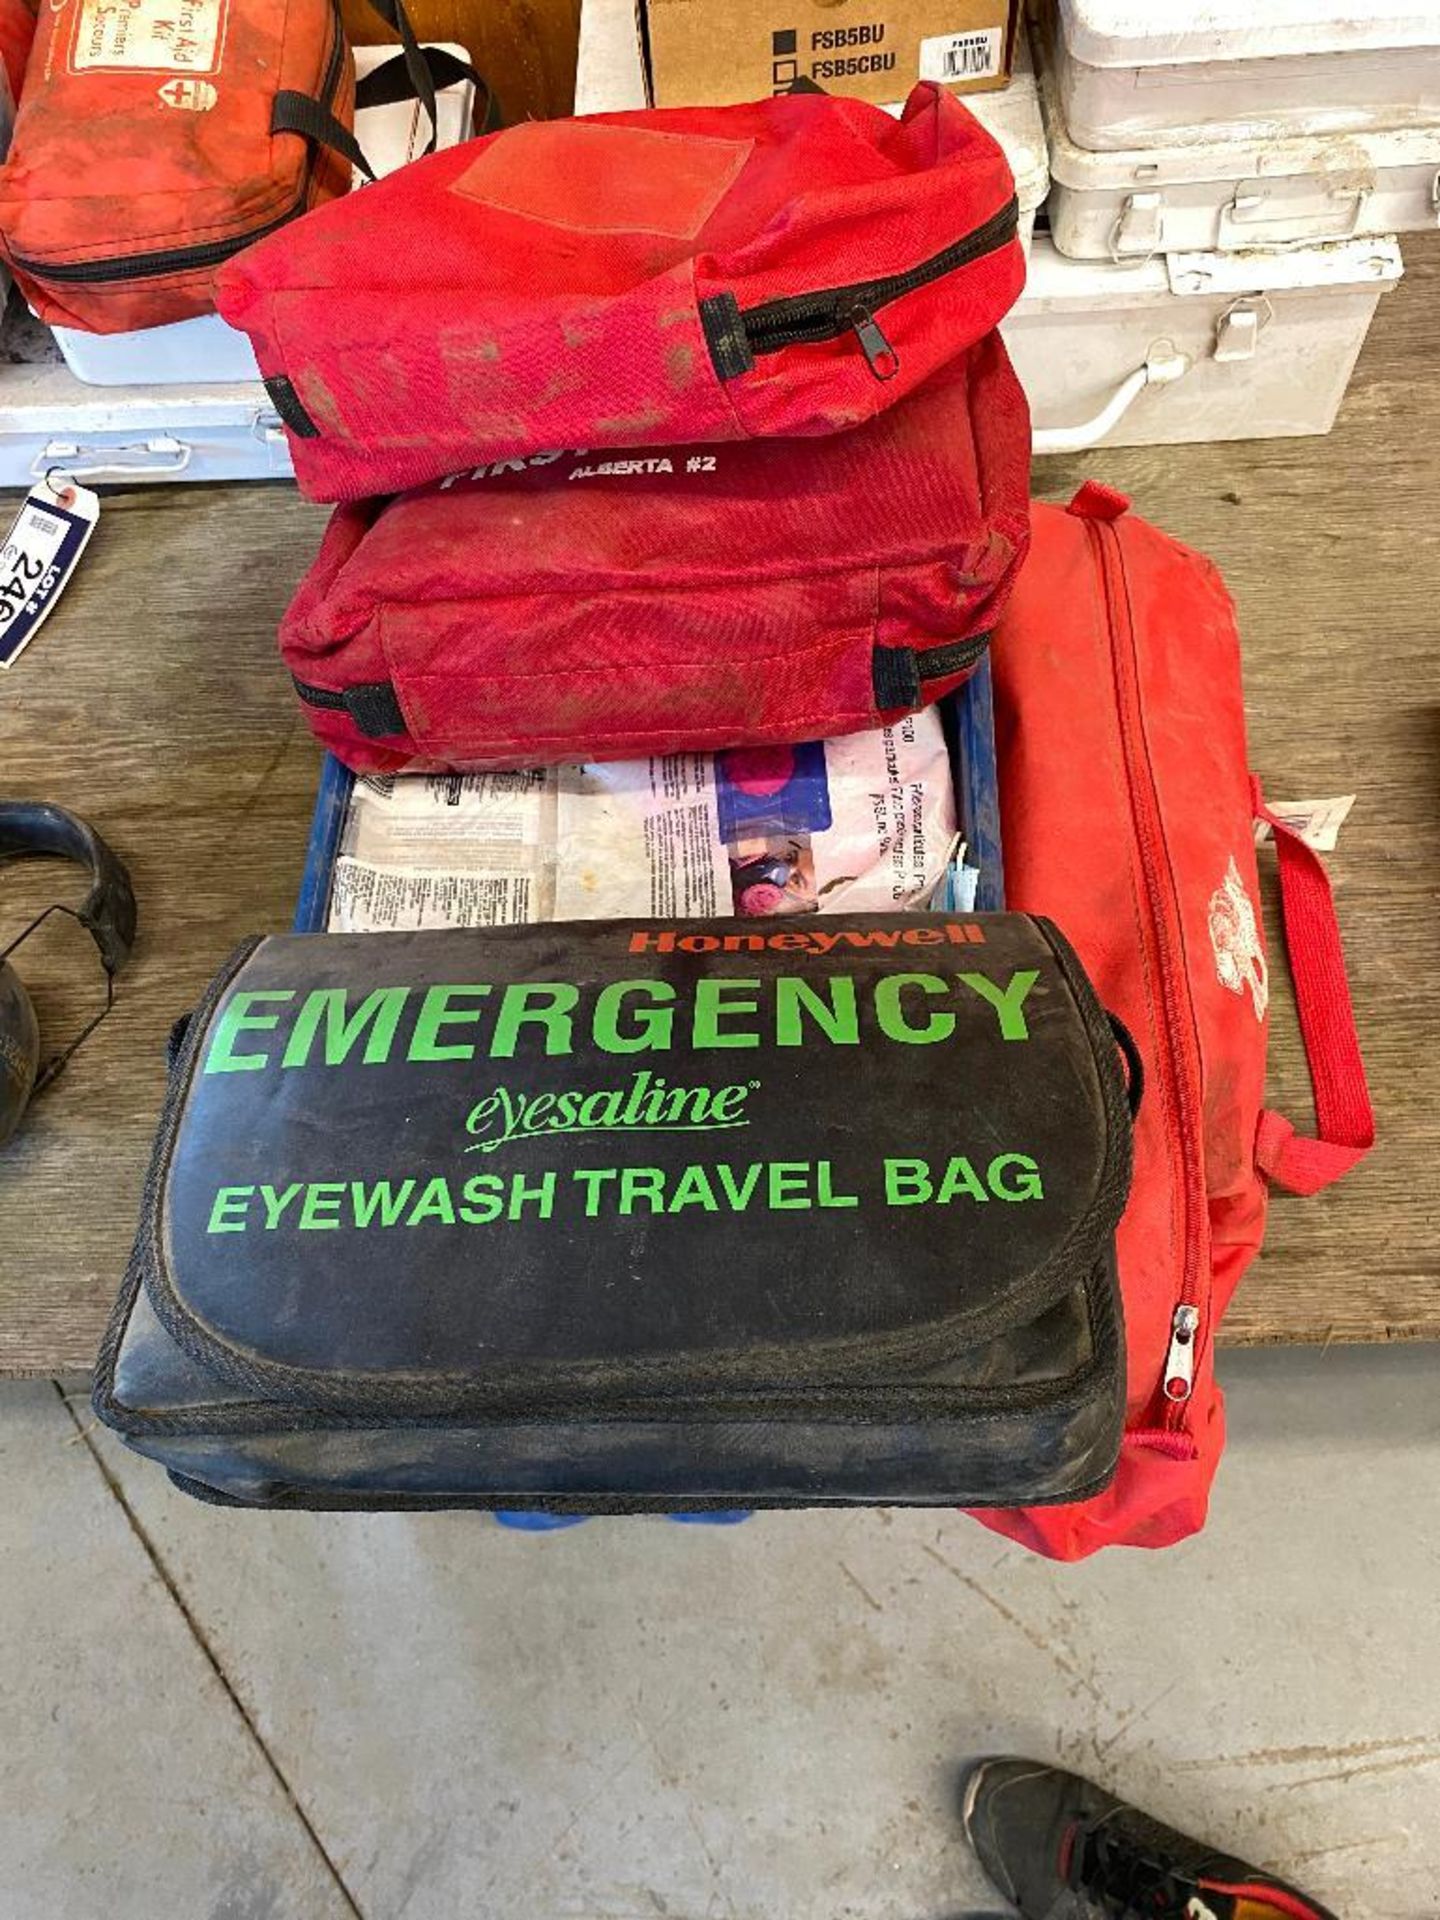 Lot of First Aid Kits, Emergency Eye Wash Travel Bag and Emergency Road Kit. - Image 2 of 2